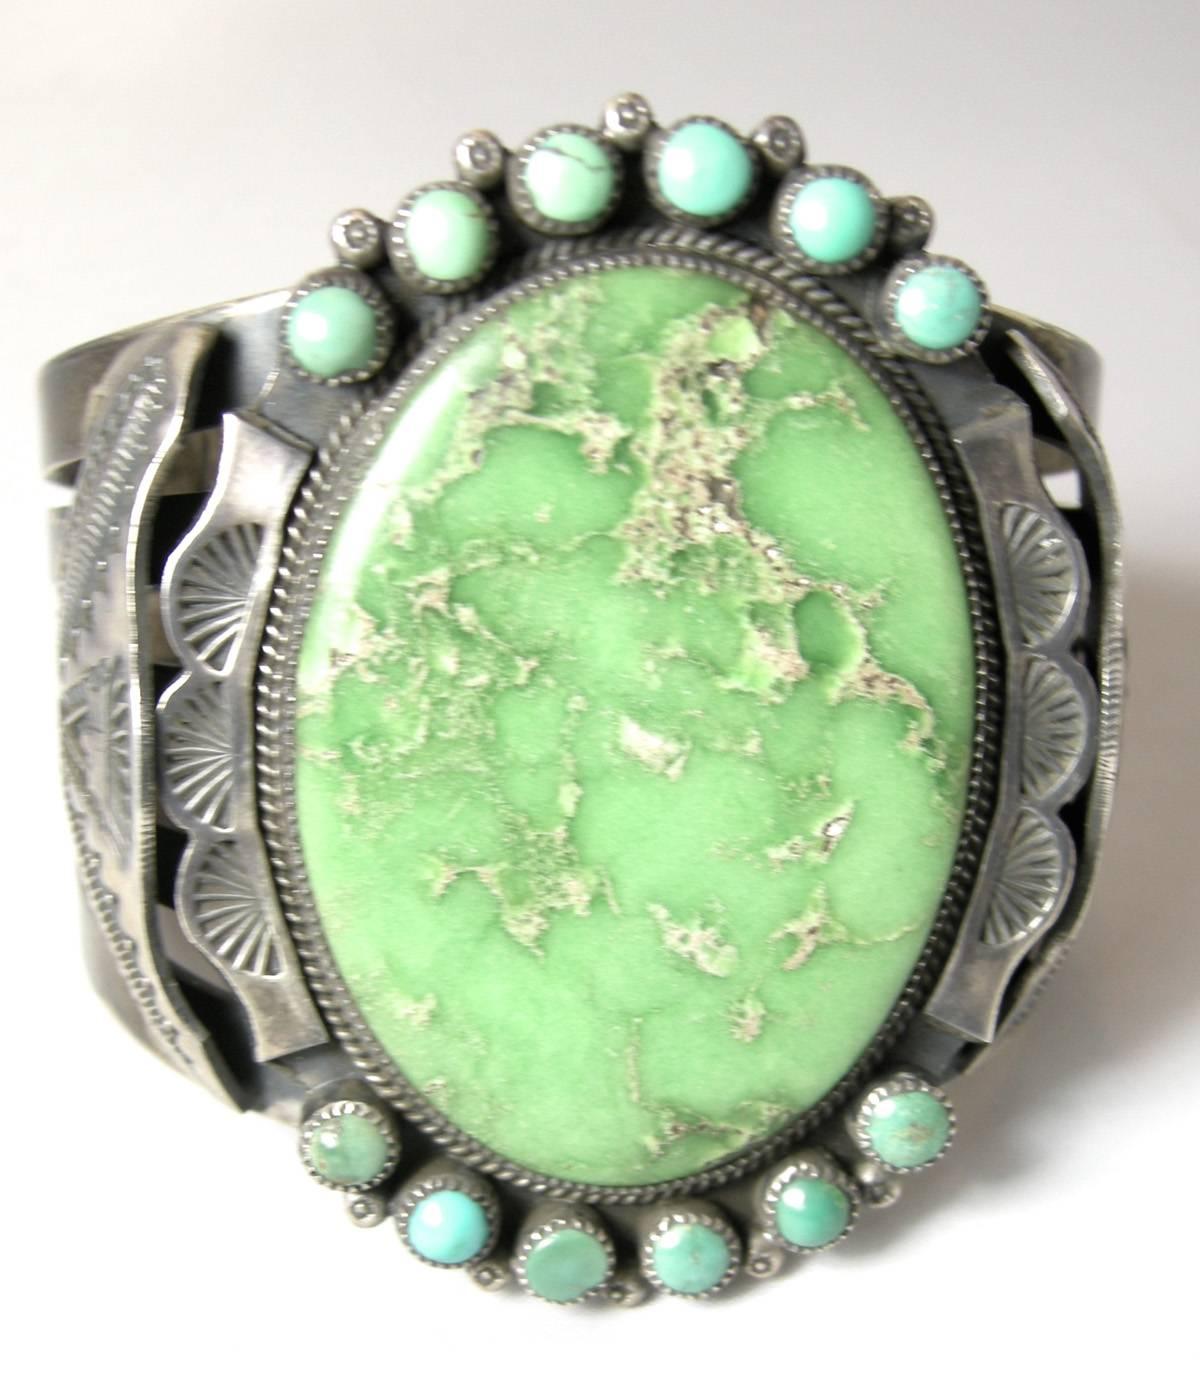 This wonderful vintage sterling silver Navajo cuff has a large green oval center and accented with turquoise round beads on each end.  The workmanship on this cuff is superb with etched wings on both sides.  It is 2-3/4” high and 2-1/4” wide.  The